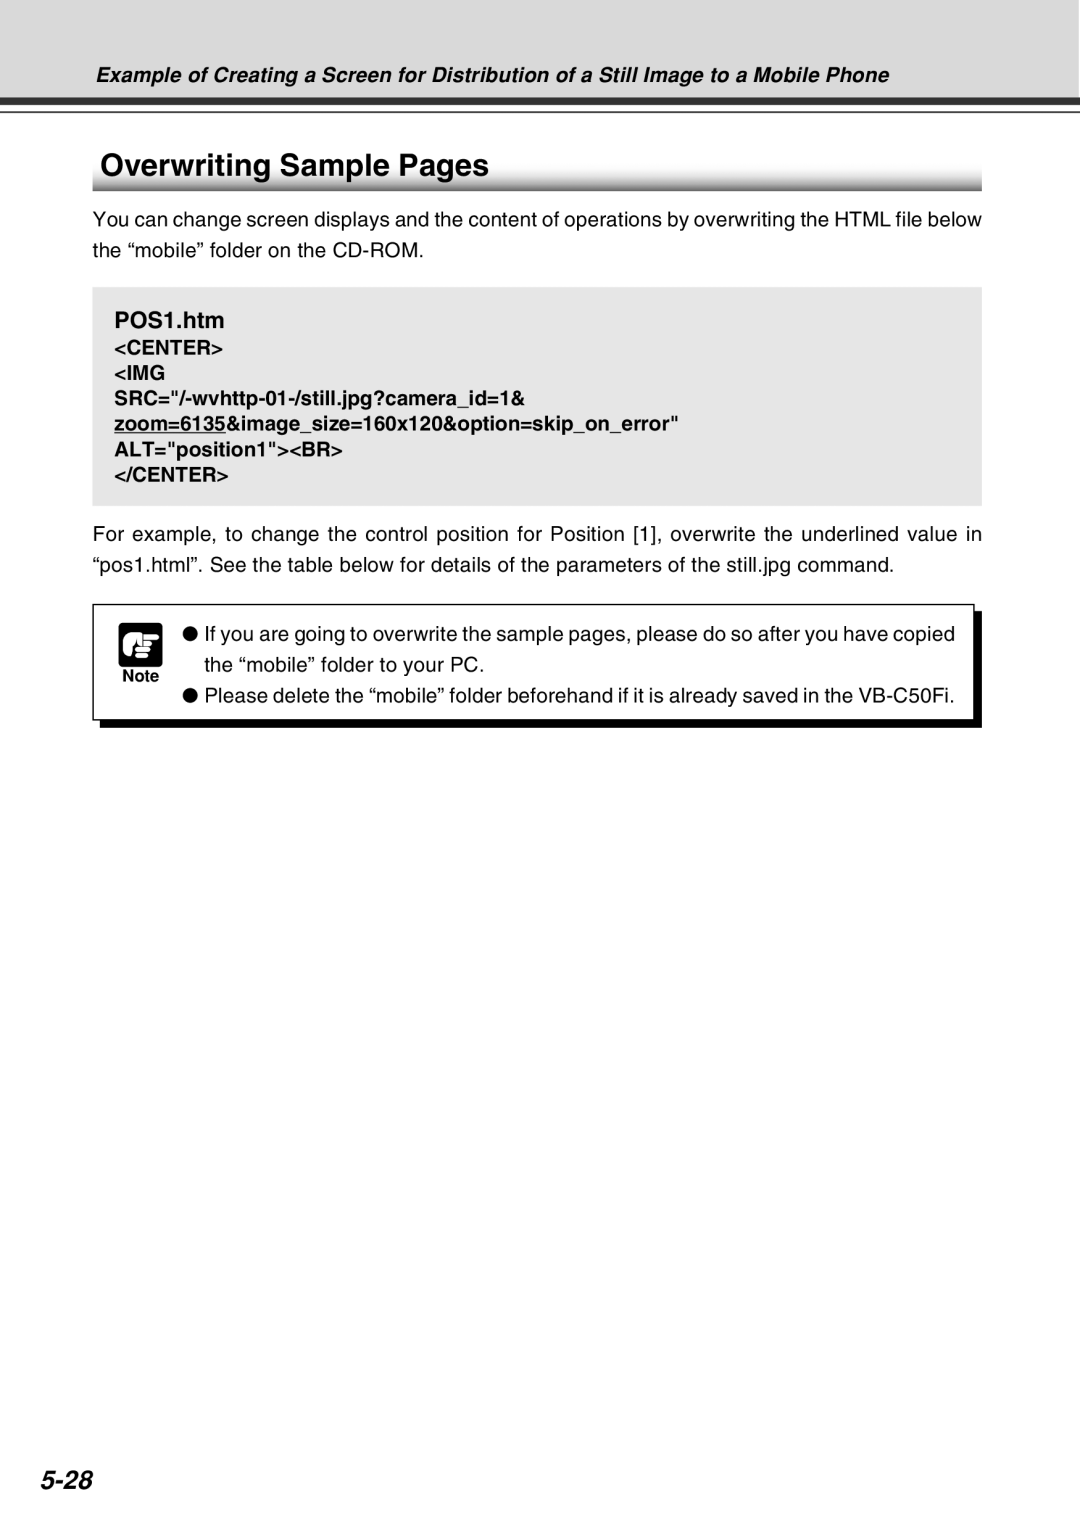 Canon Vb-C50fi user manual Overwriting Sample Pages, 5-28, POS1.htm, <Center>, </Center> 